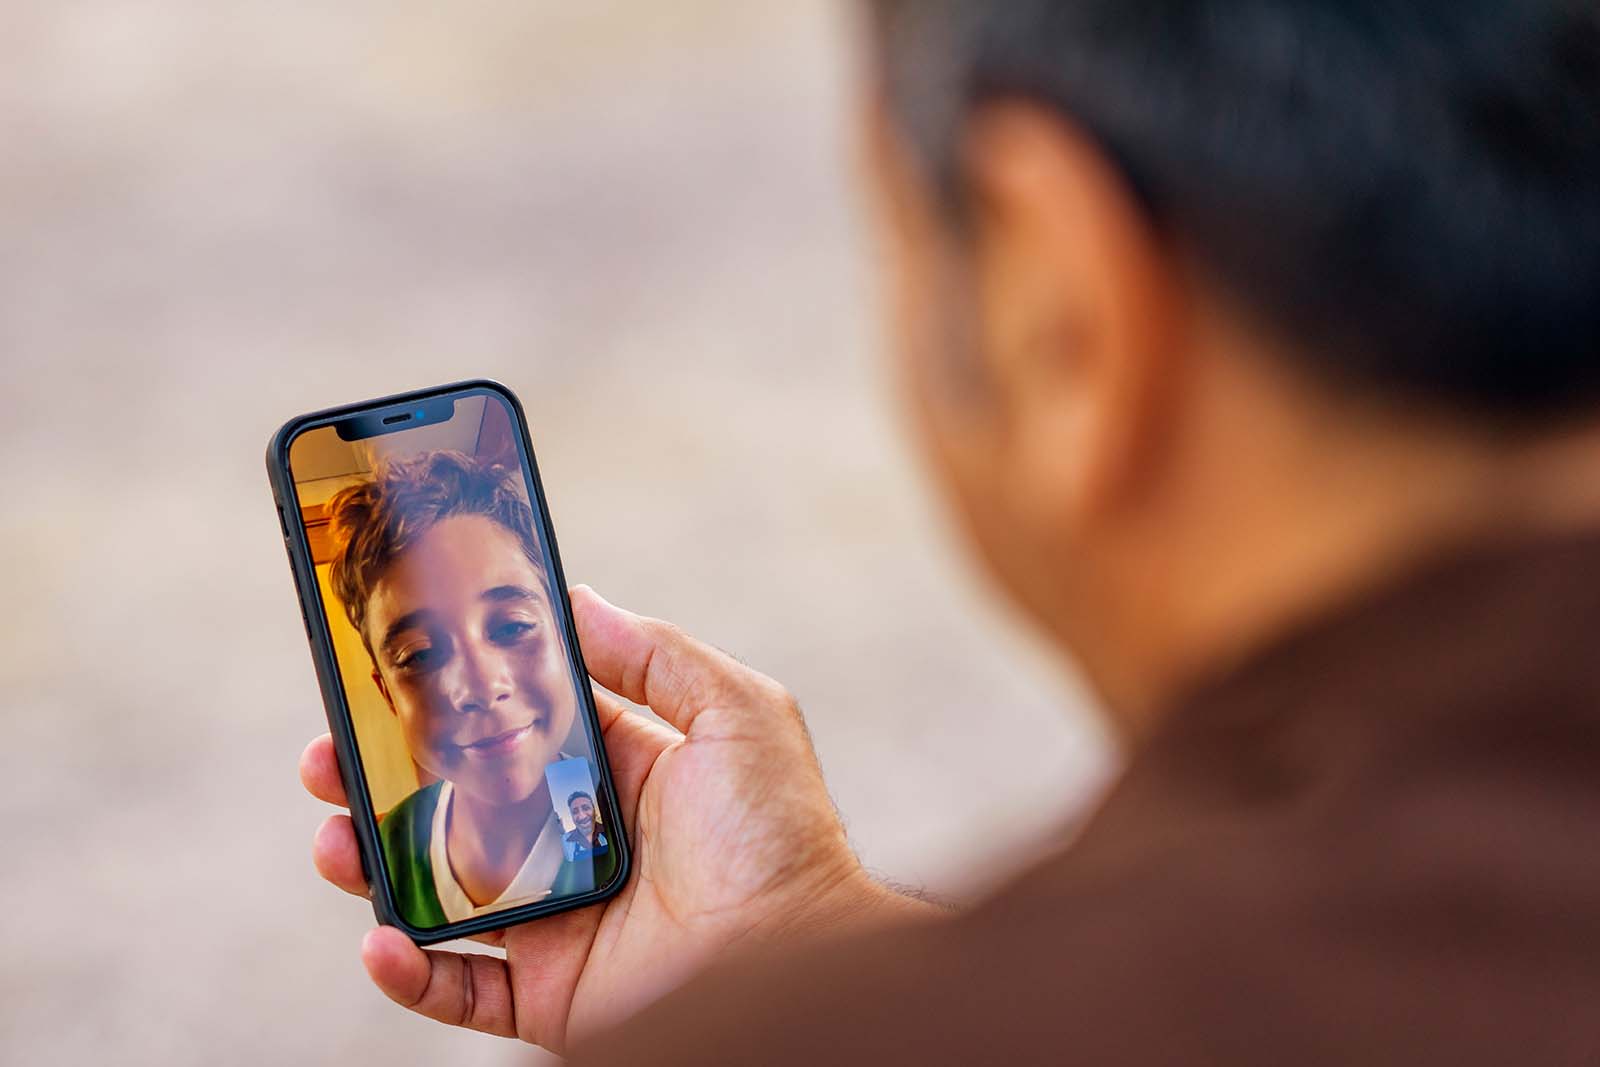 Man doing video chat on smartphone